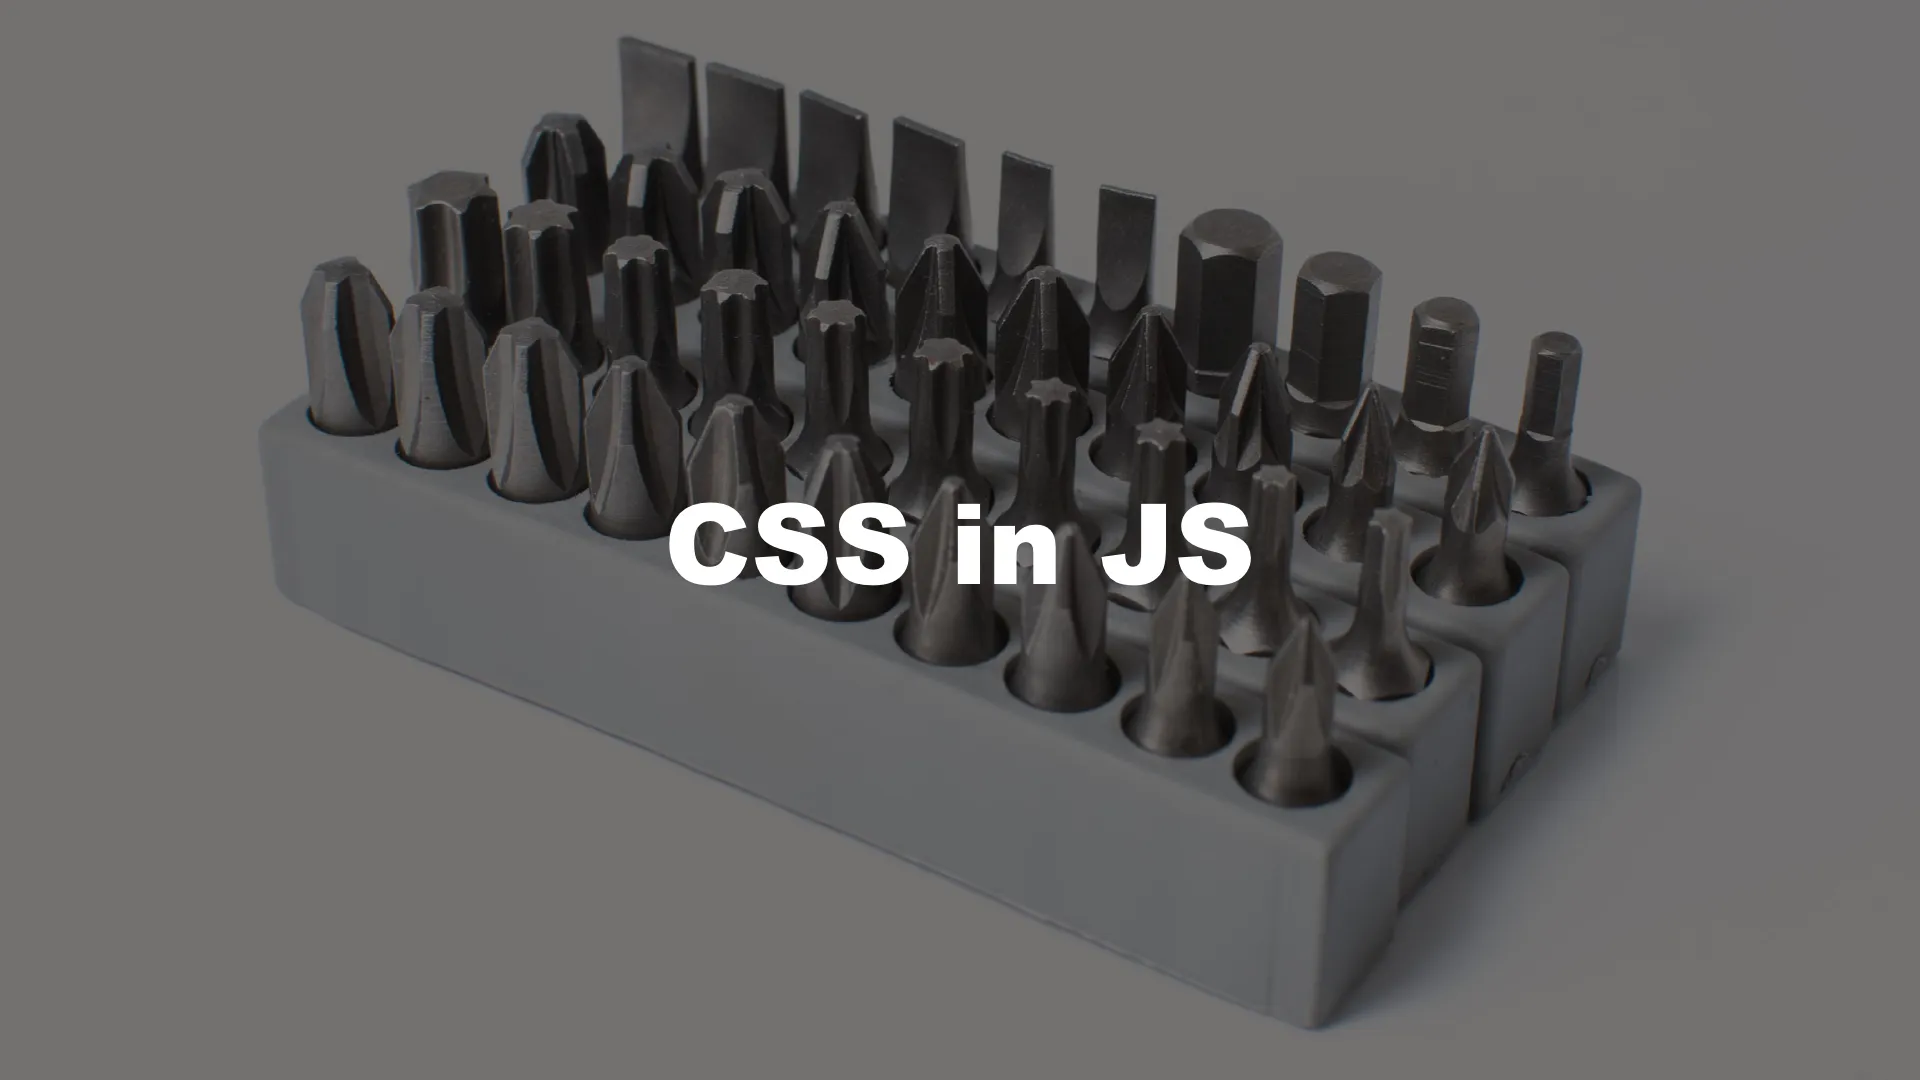 CSS is JS is maturing, and will look more like this pretty soon!